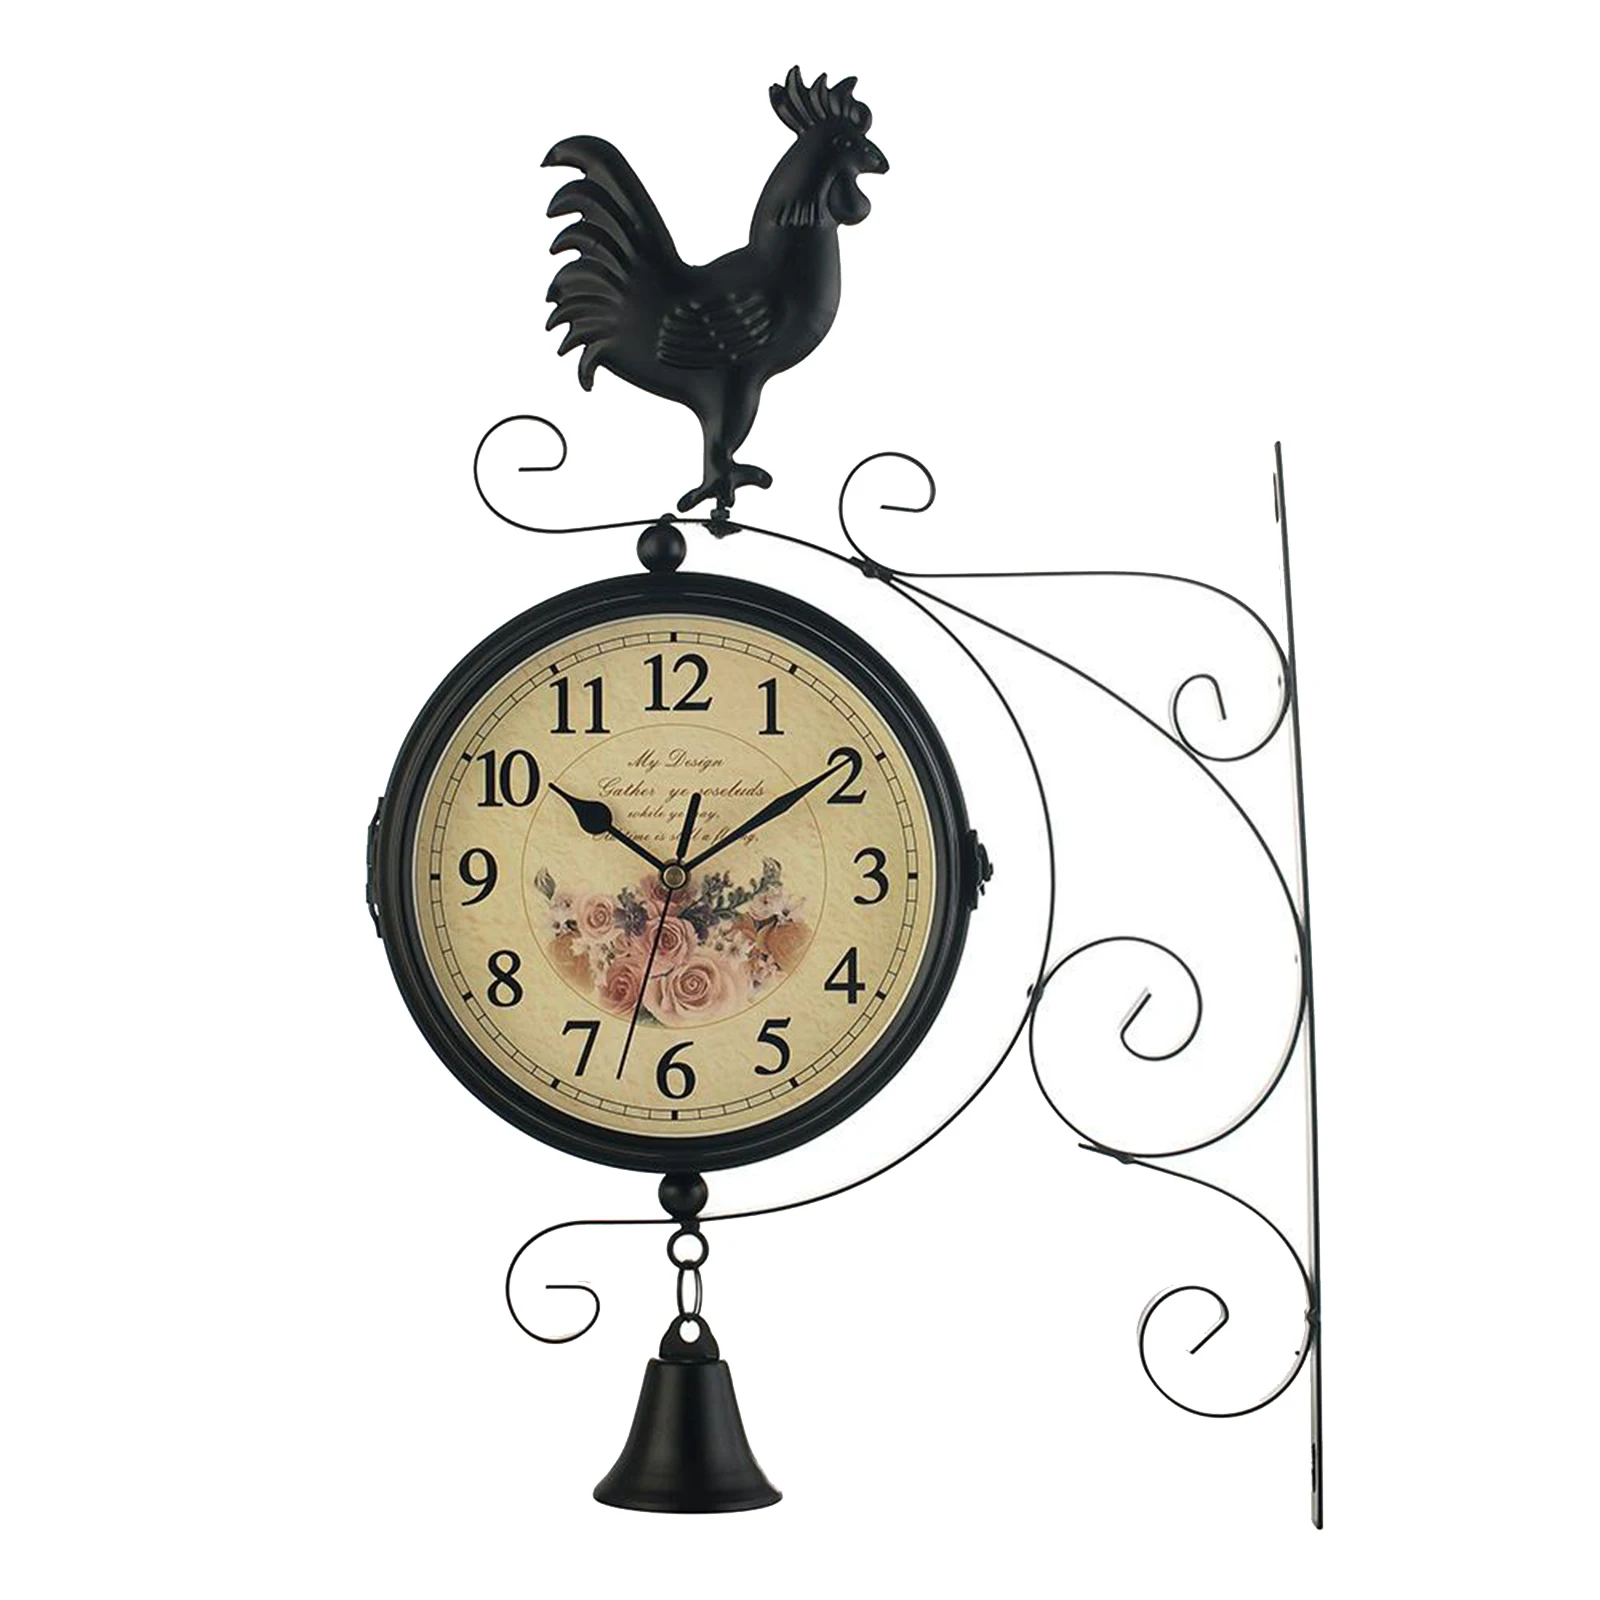 Outdoor Garden Wall Station Clock Double Sided Vintage Retro Home Decor Outdoor Wall Station Clock Sided